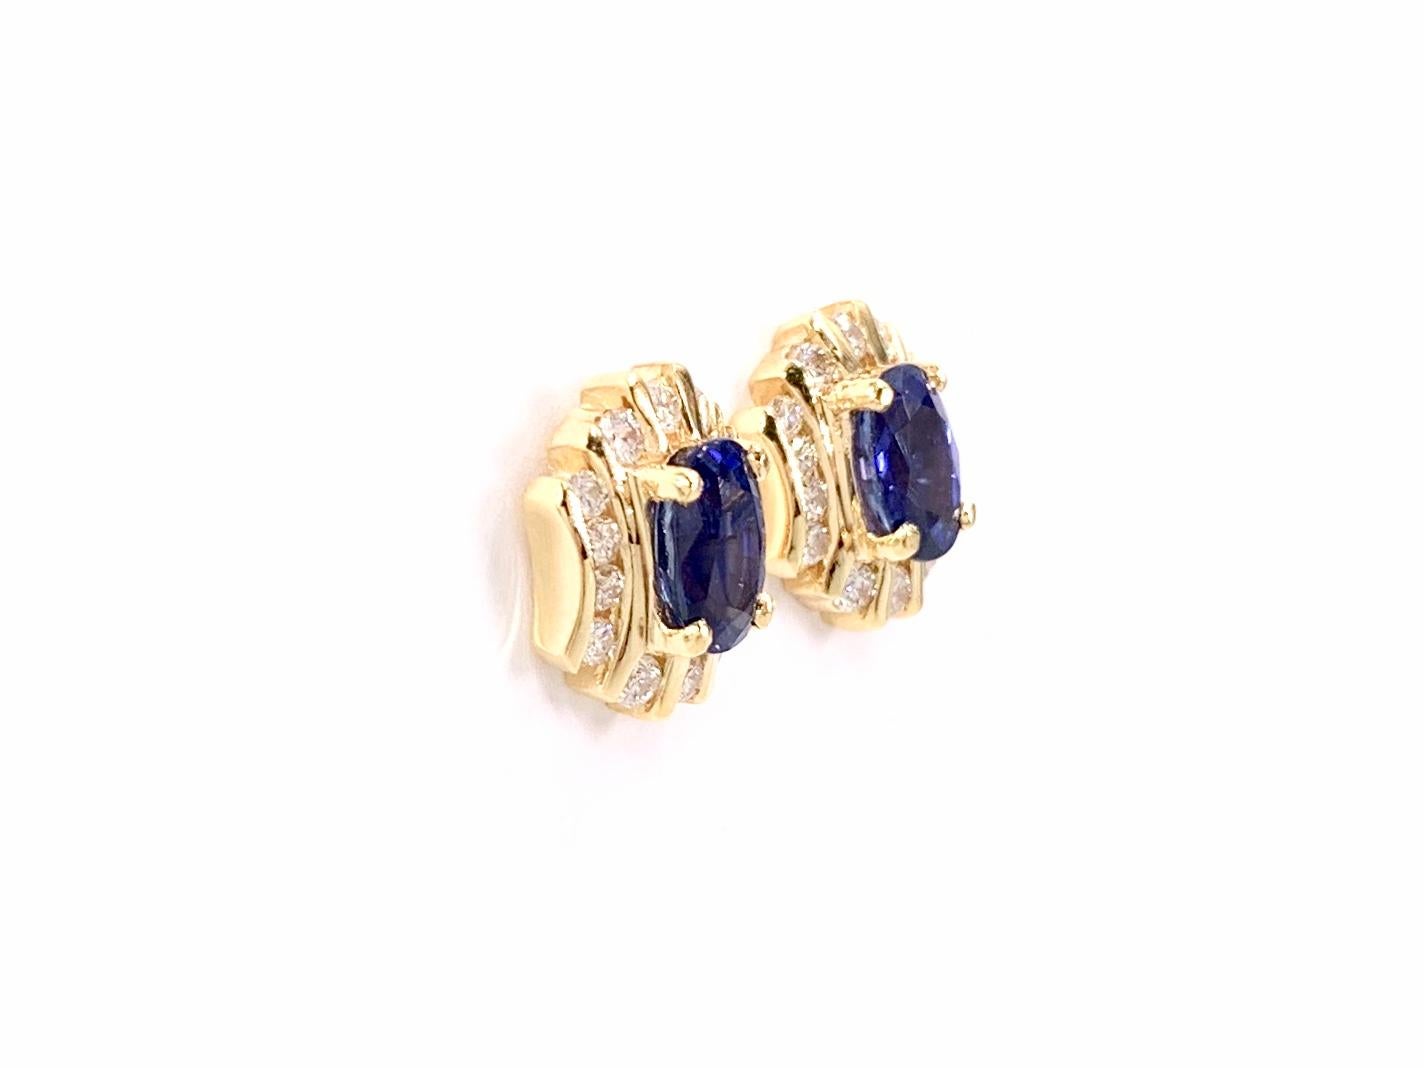 Beautiful every-day button stud earrings made with 18 karat yellow gold featuring two high quality oval blue sapphires at 1.89 carats total weight. Sapphires have excellent clarity with a rich, royal blue hue and medium transparency - not at all